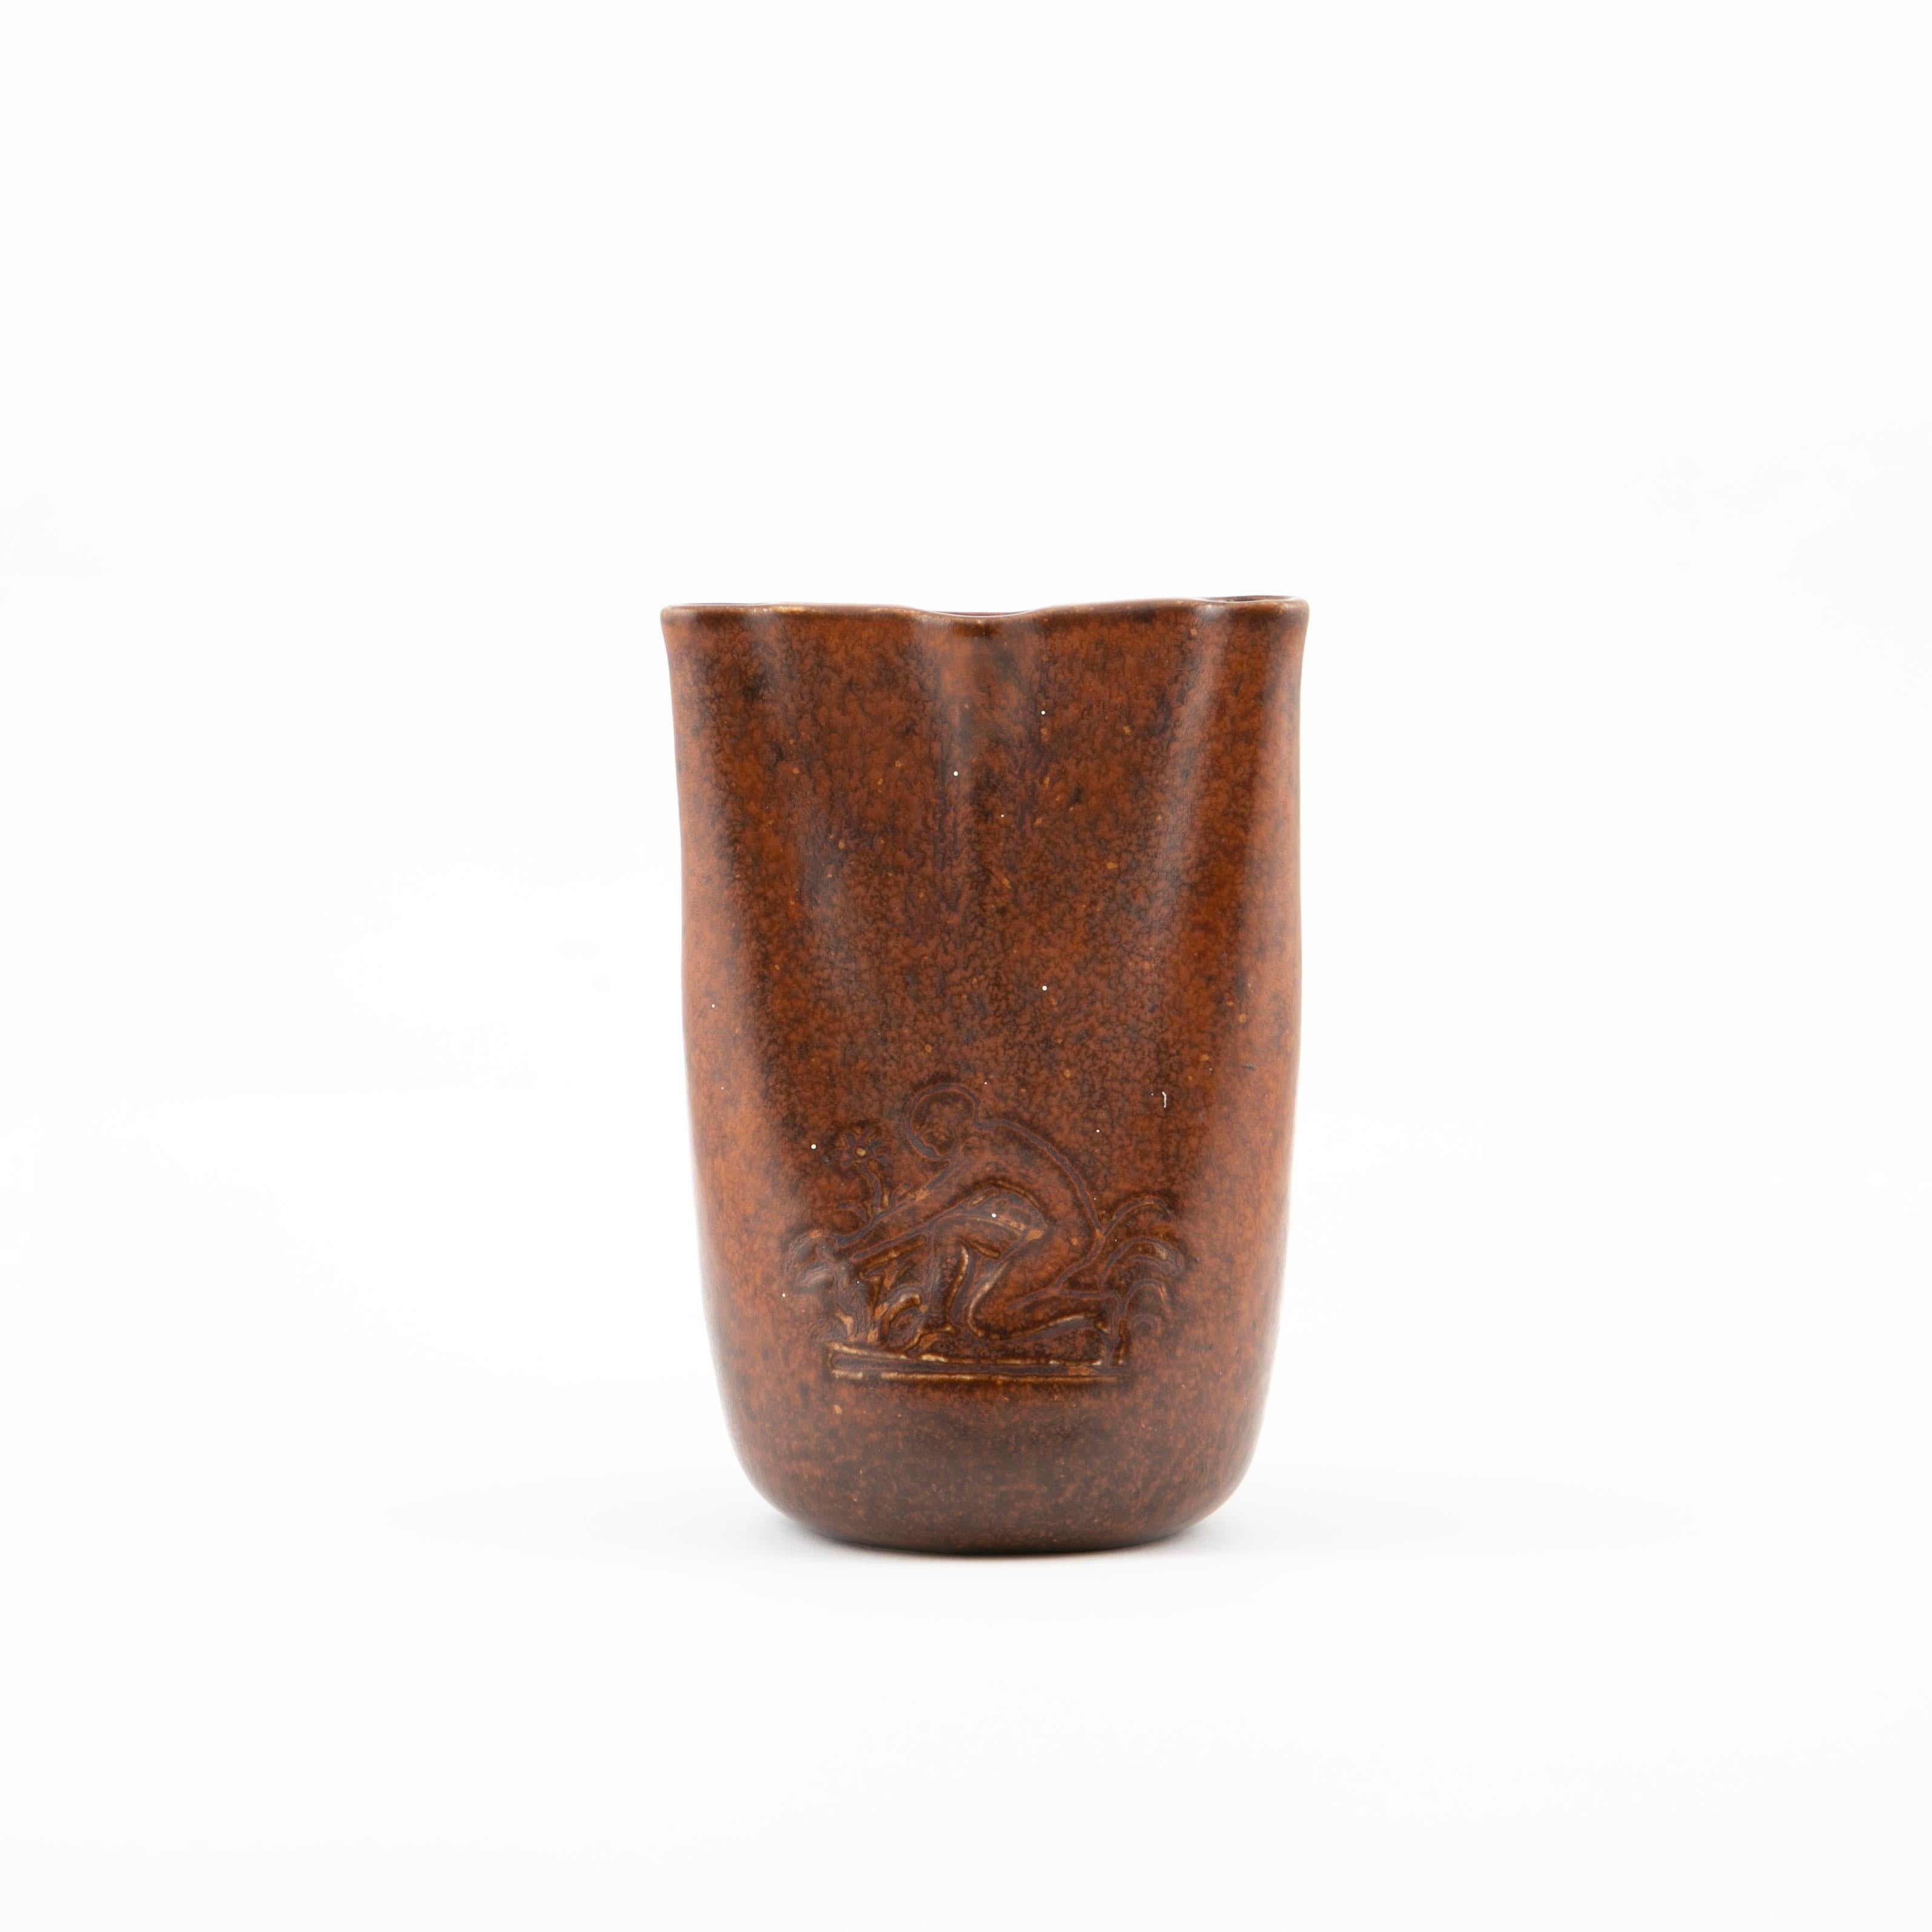 Jens Jakob Bregnø, Danish 1877-1946

A stoneware carnation vase with maroon glaze. At the top three holes for carnations / single flower. Presumably on of a kind.
On one side side relief of a person kneeling in a flower bed.

Signed with monogram